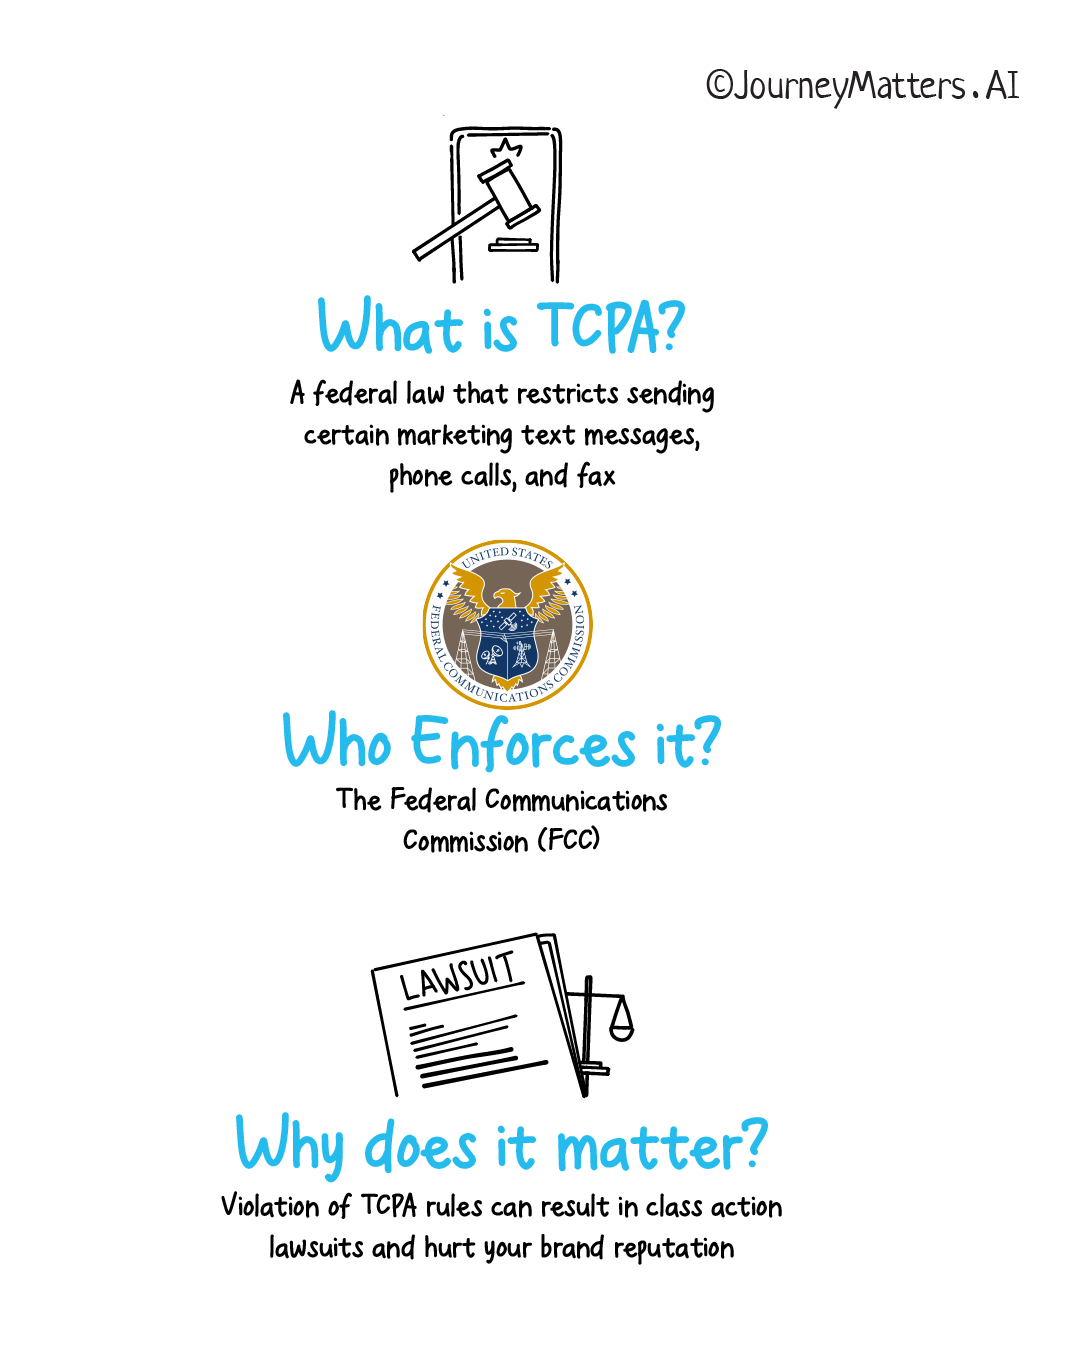 Telephone Consumer Protection Act or TCPA is a federal law enforced by Federal Communications Commission that set rules related to sending text messages, fax andmaking calls.